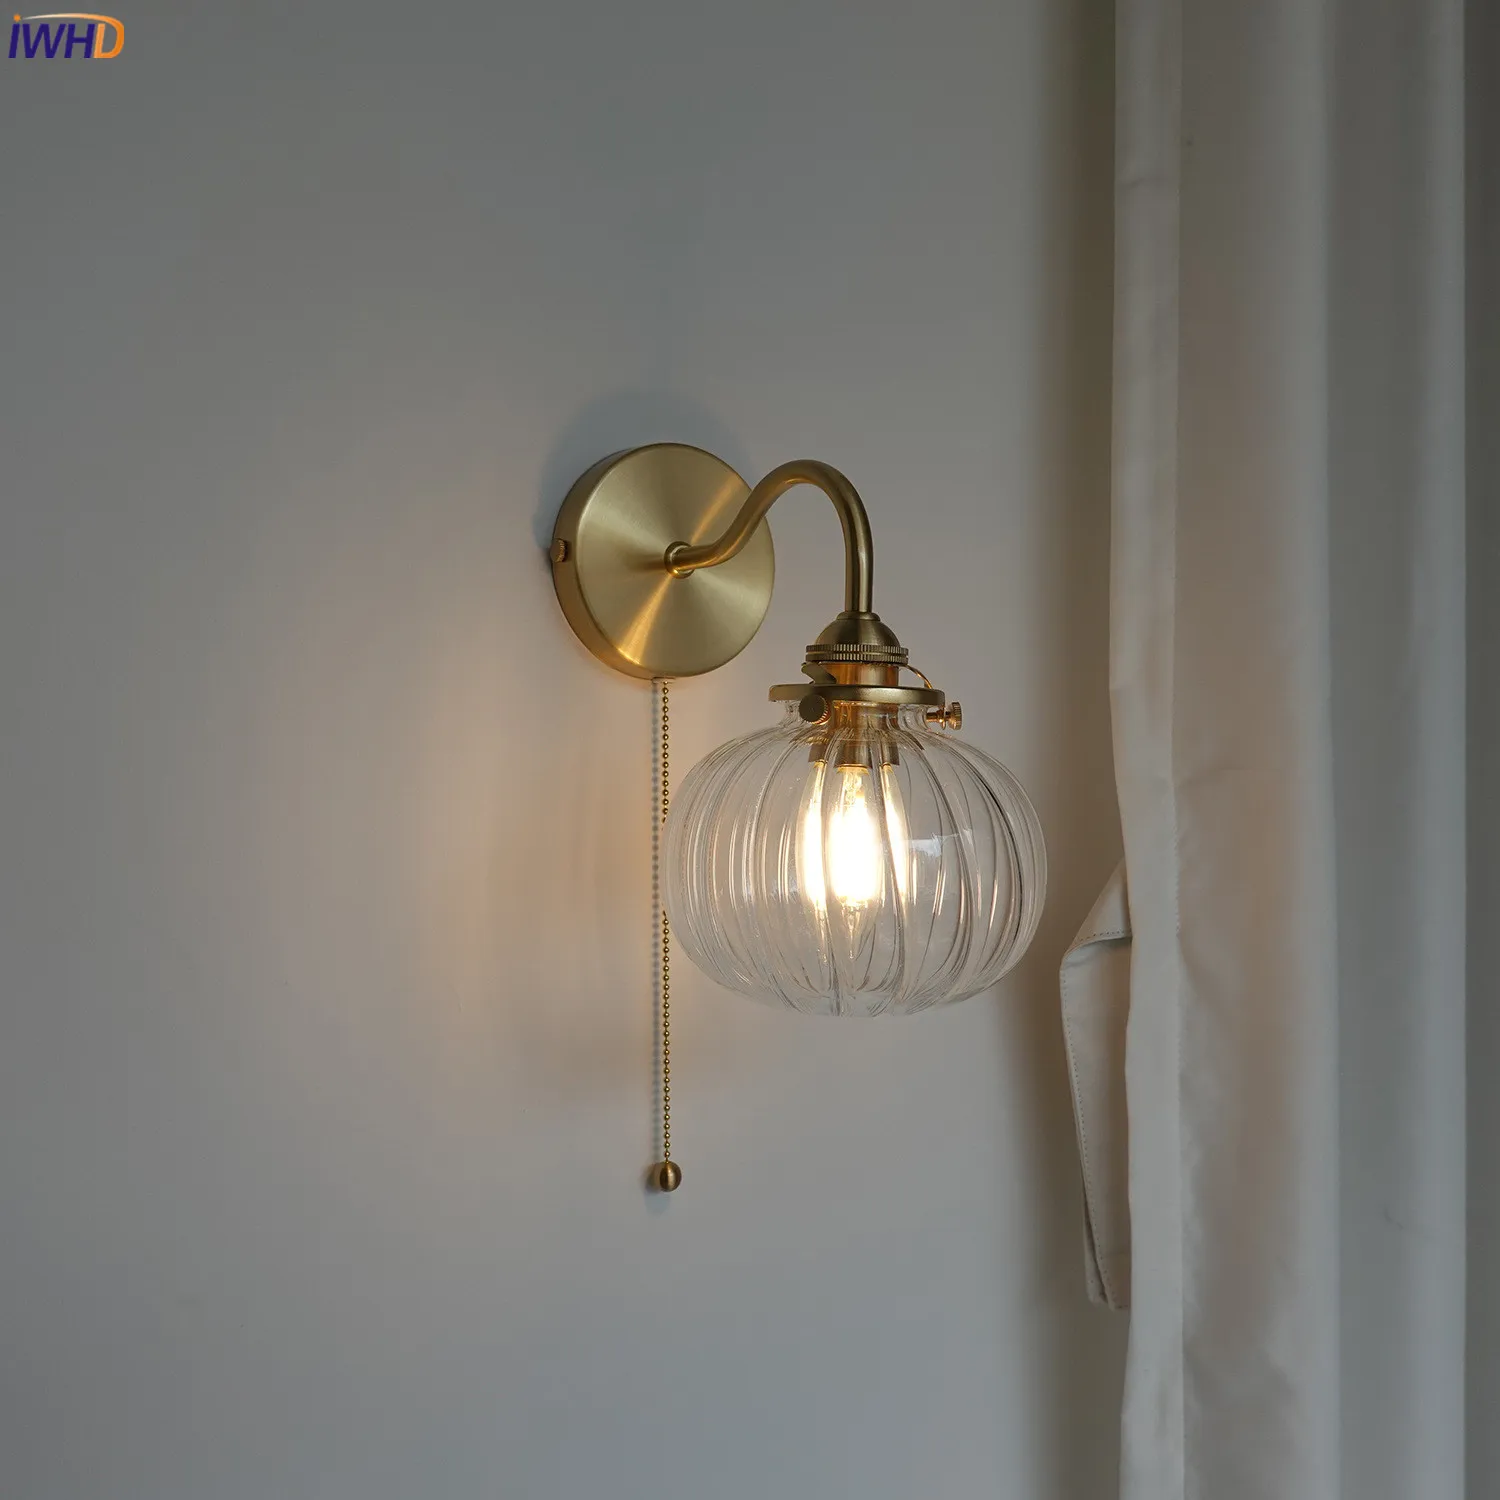 IWHD Little Glass Ball LED Wall Light Fixtures Plug In Switch Bedroom Bathroom Mirror Stair Nordic Modern Copper Wall Sconce